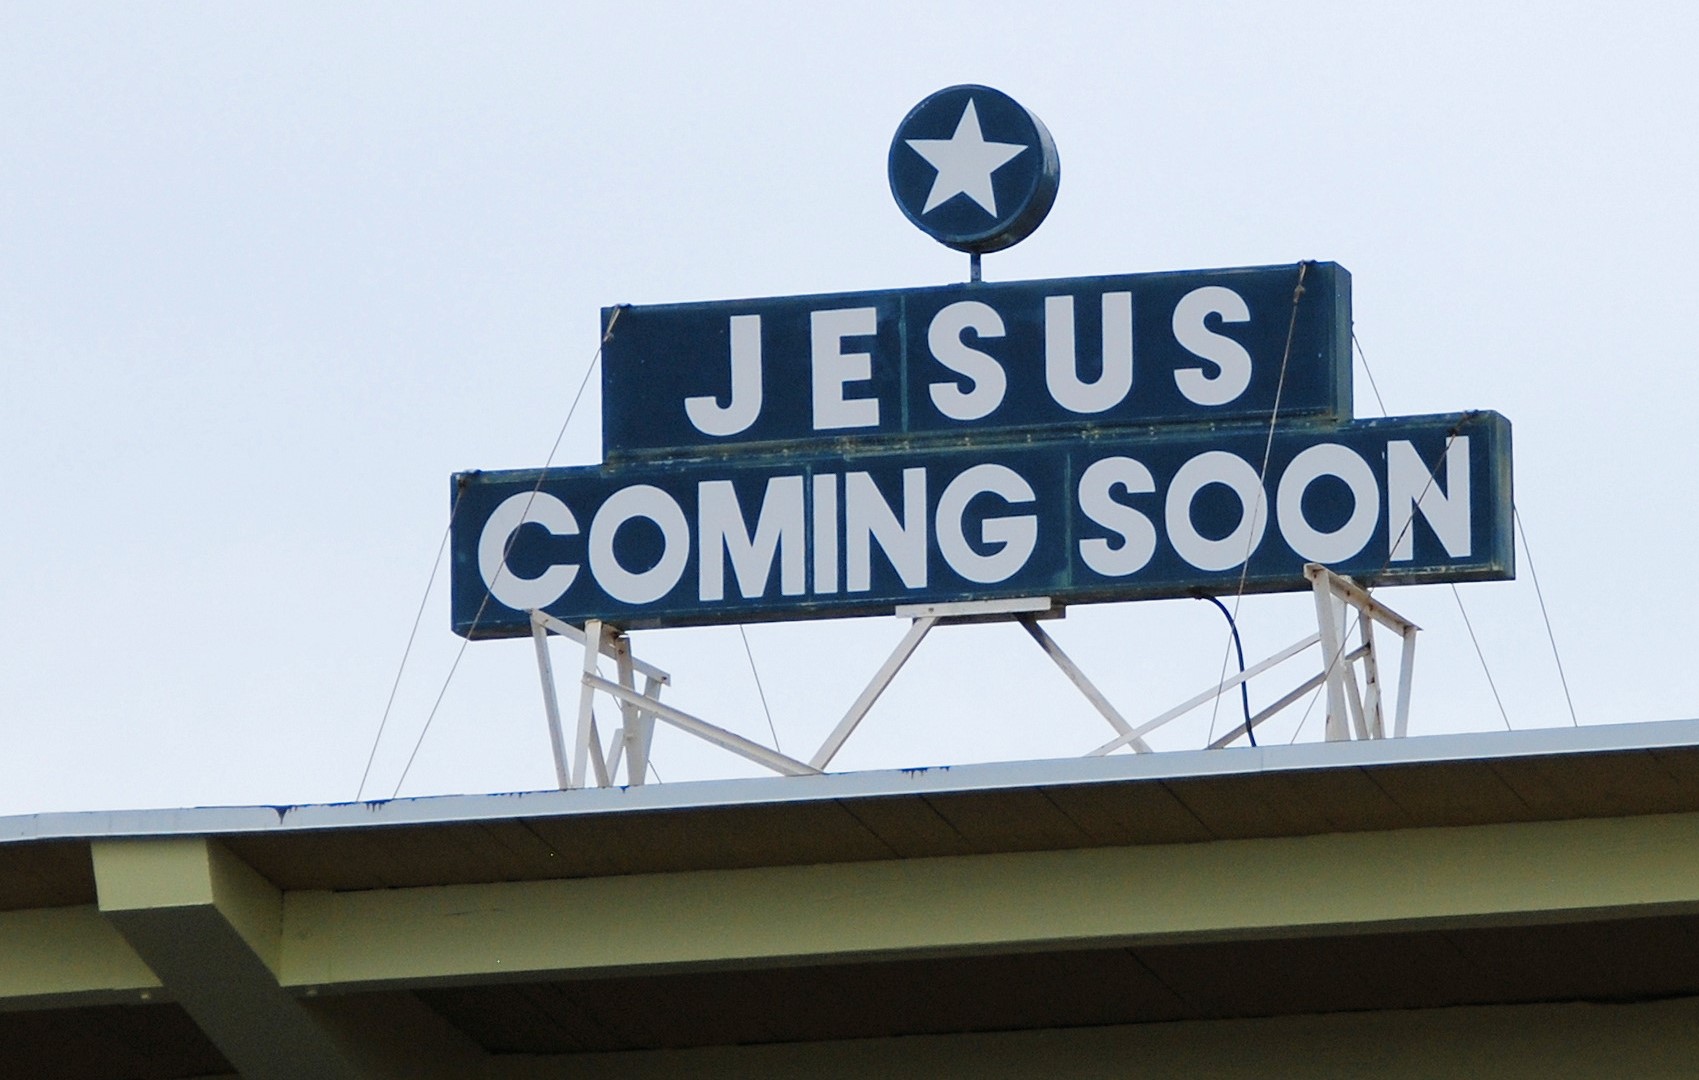 Jesus coming soon (c) Forest & Kim Starr; https://commons.wikimedia.org/